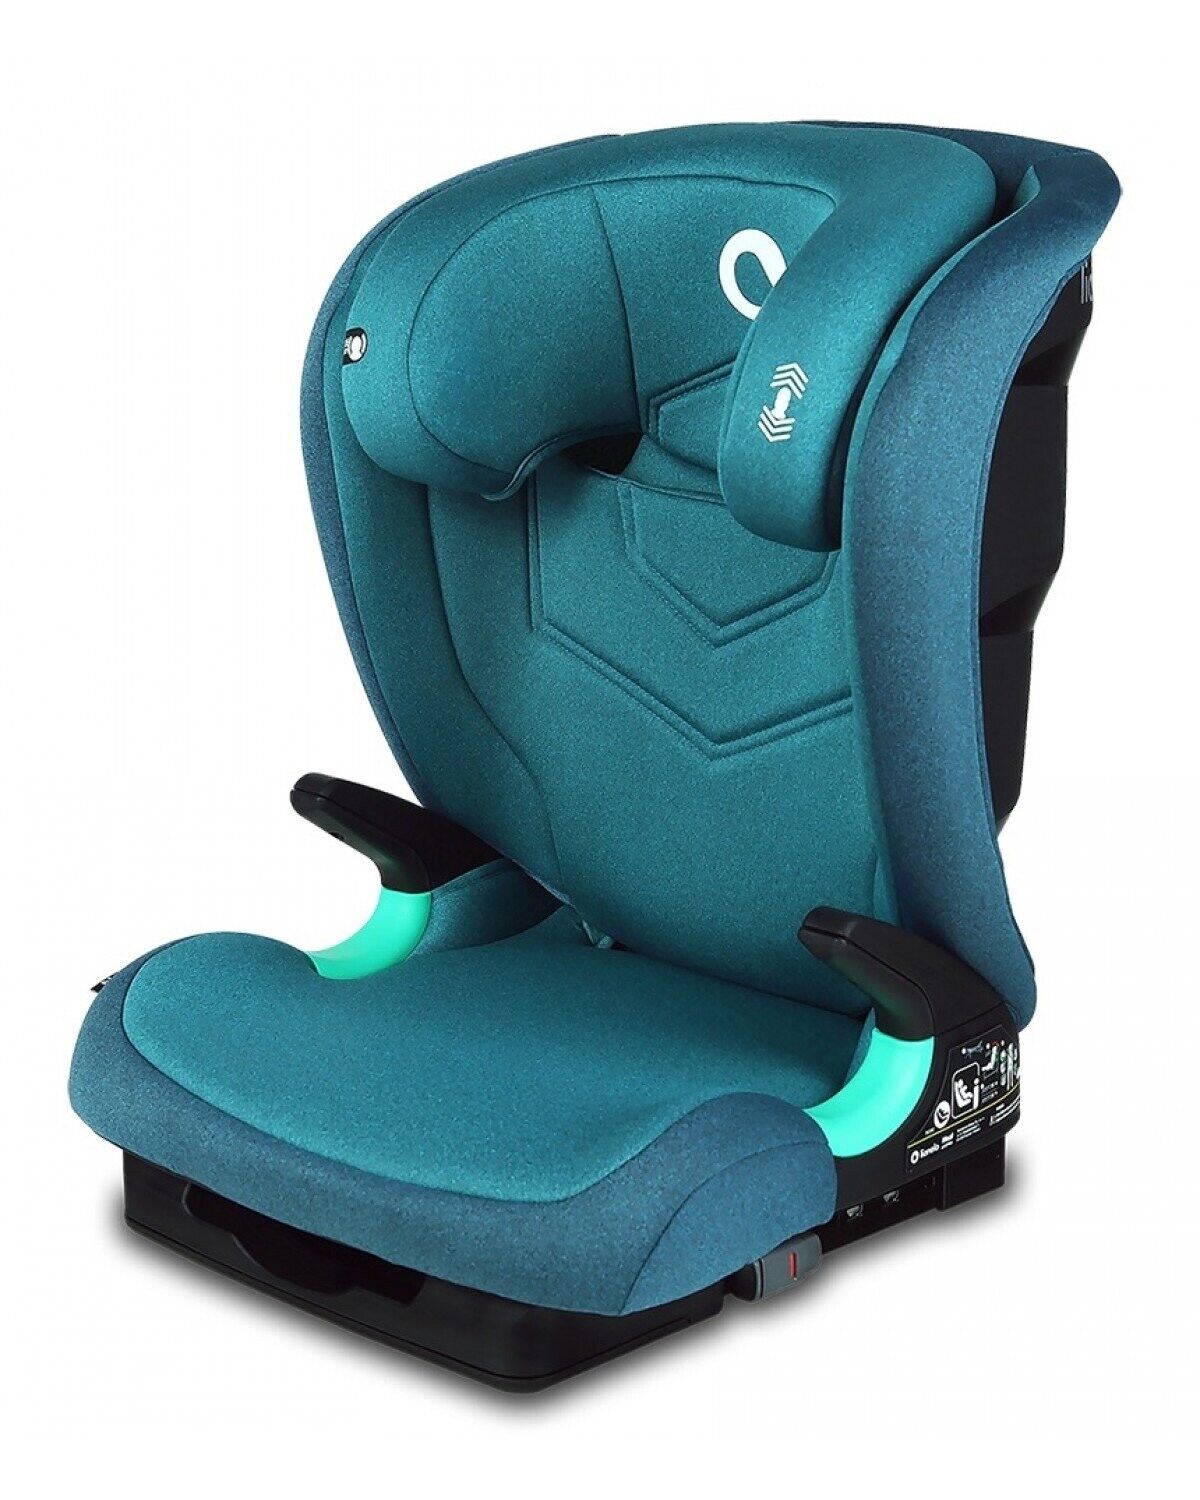 Lionelo Car Seat ISOFIX Support Kids Child i-Size Neal 15-36 kg Green  Turquoise